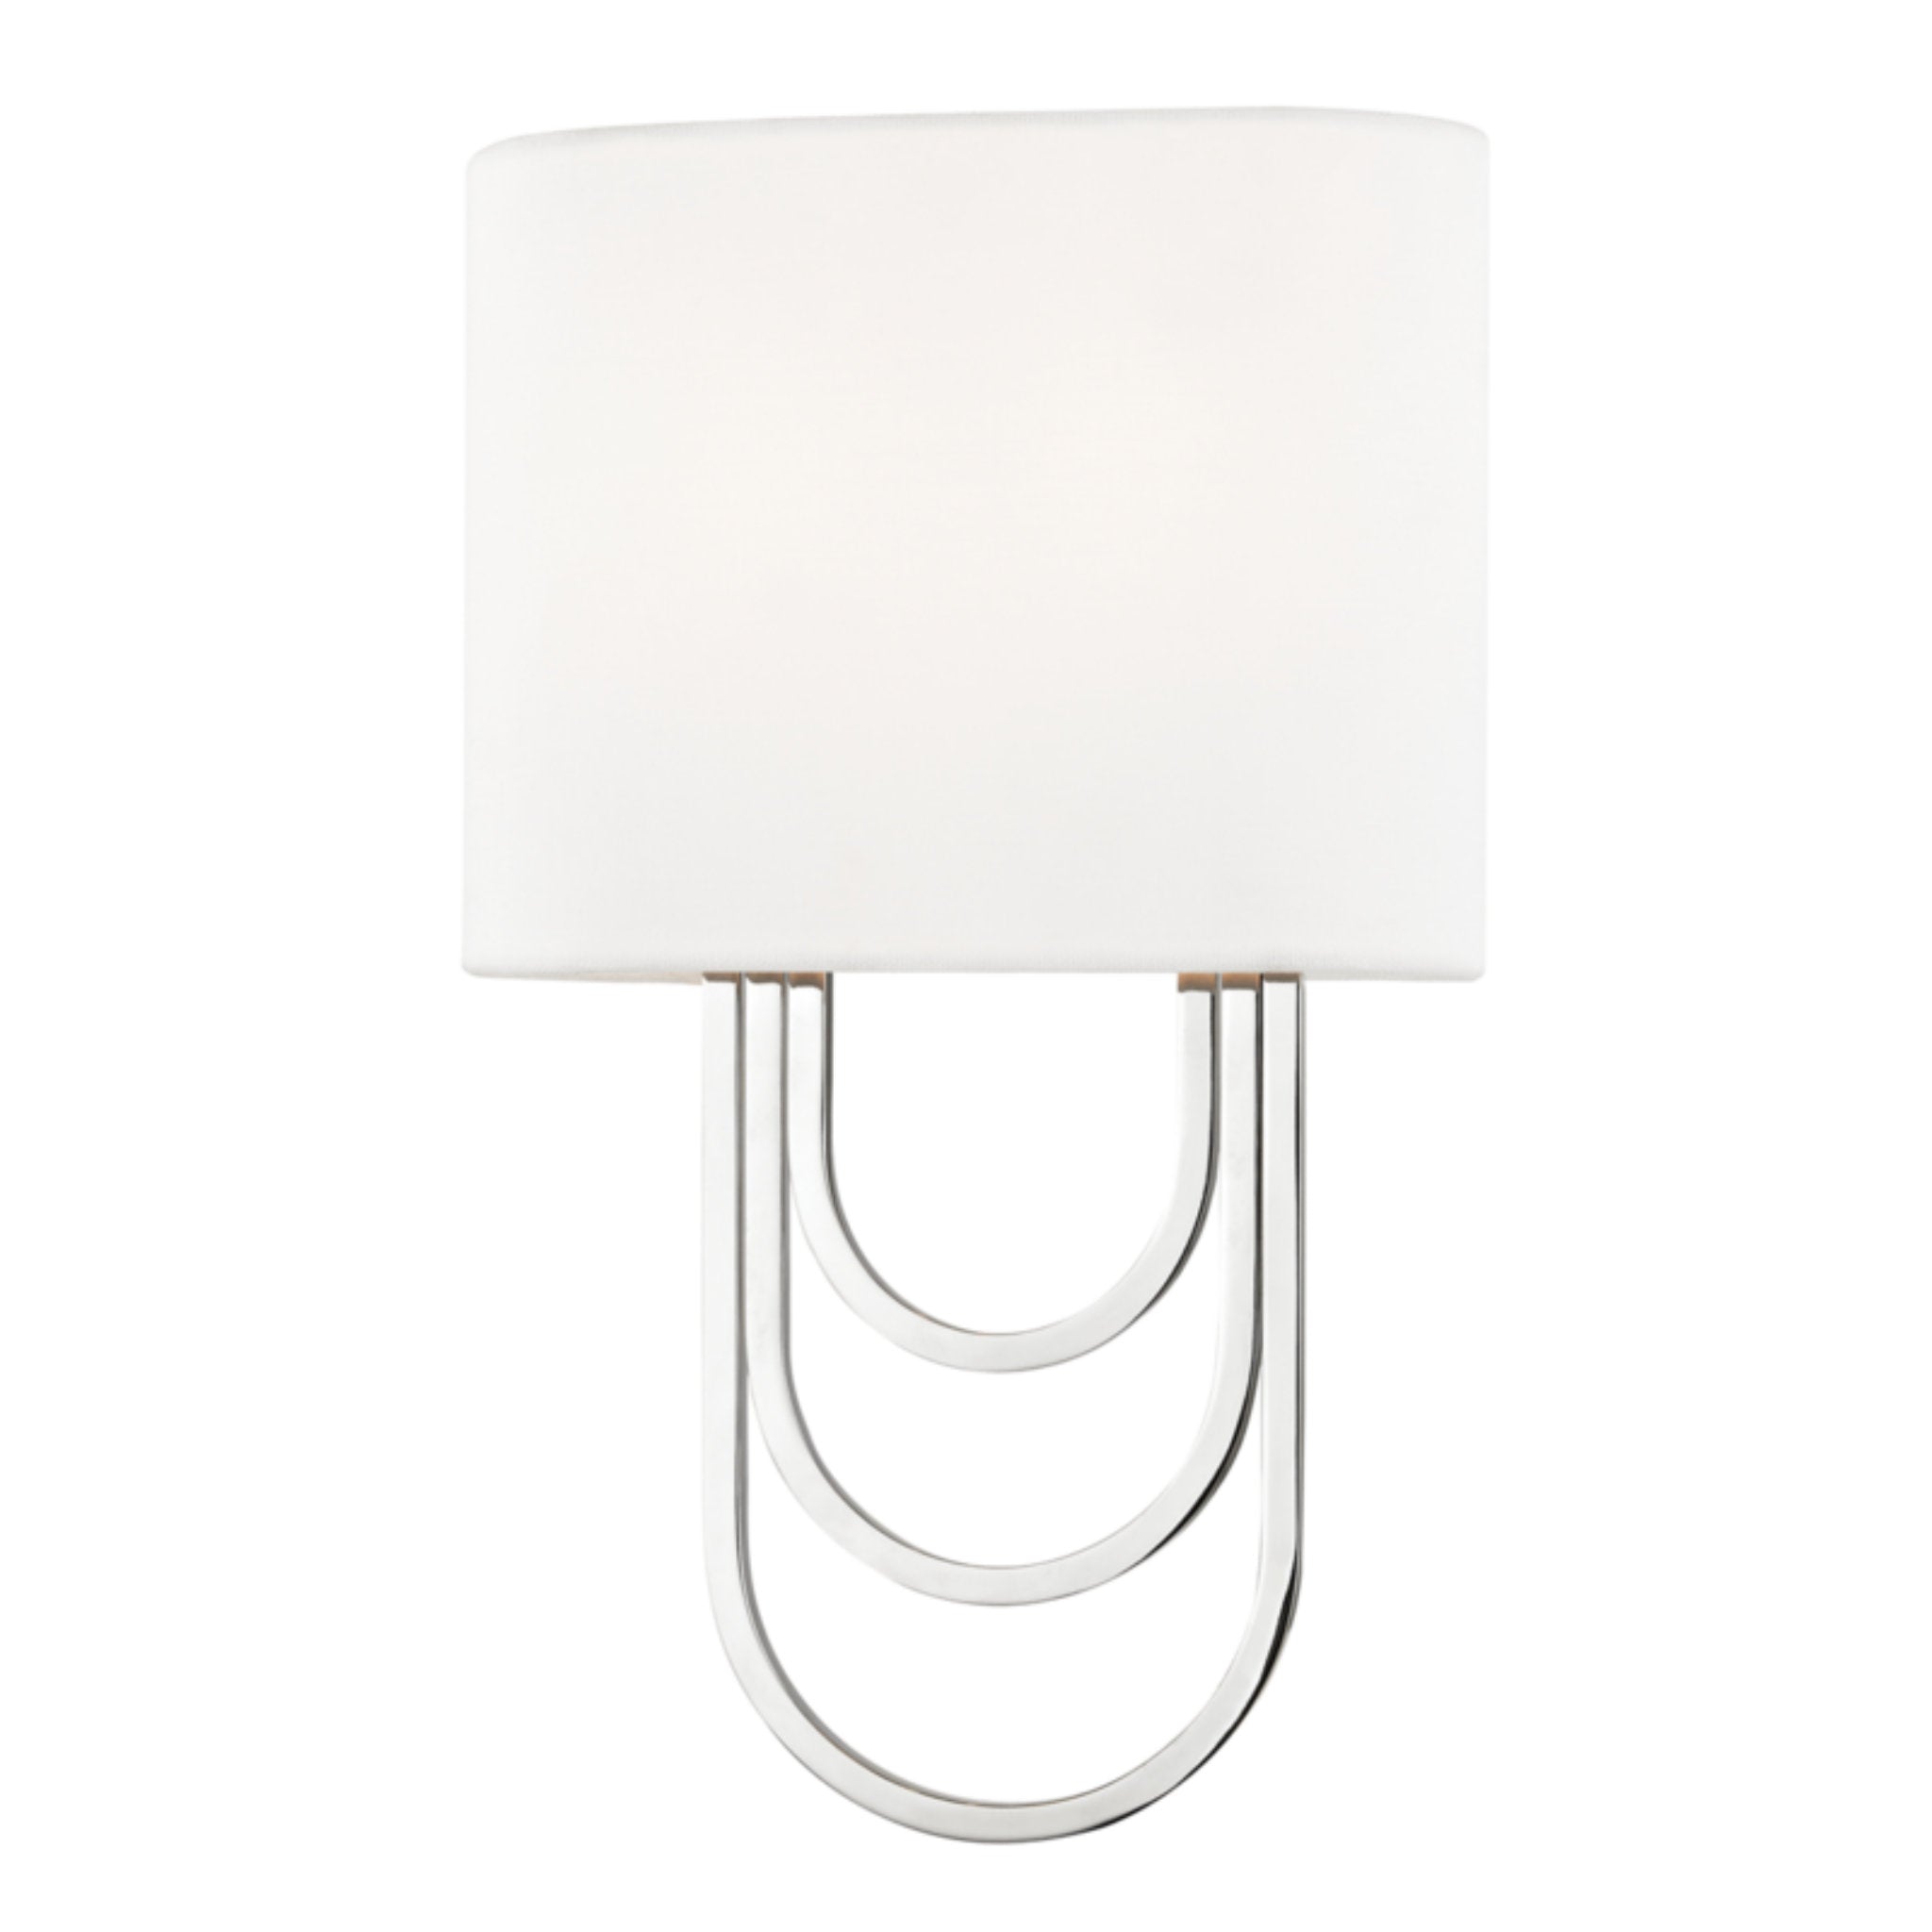 Farah 2-Light Wall Sconce in Polished Nickel